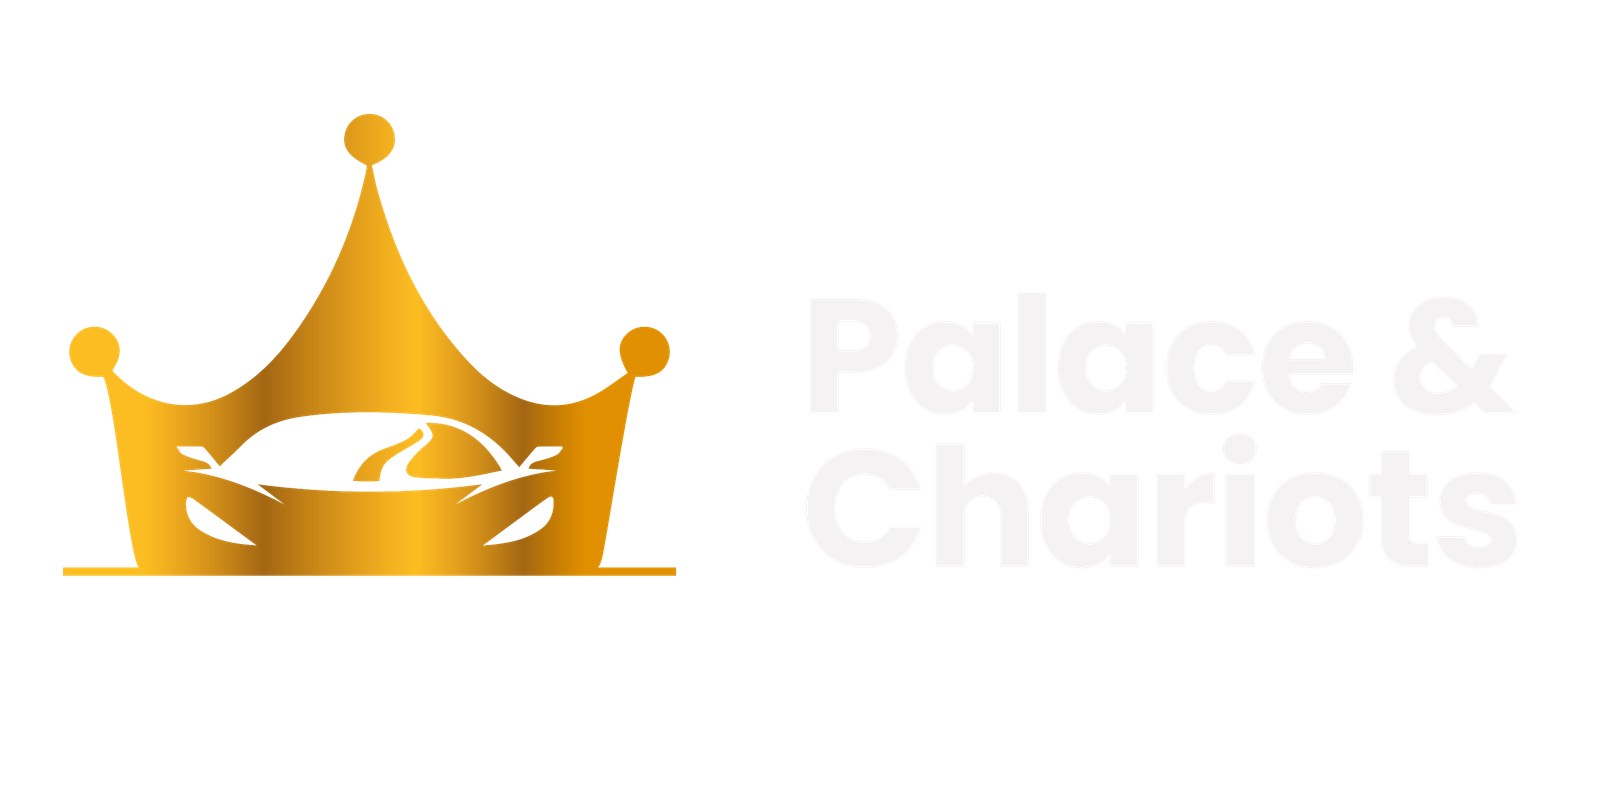 Palace and Chariot